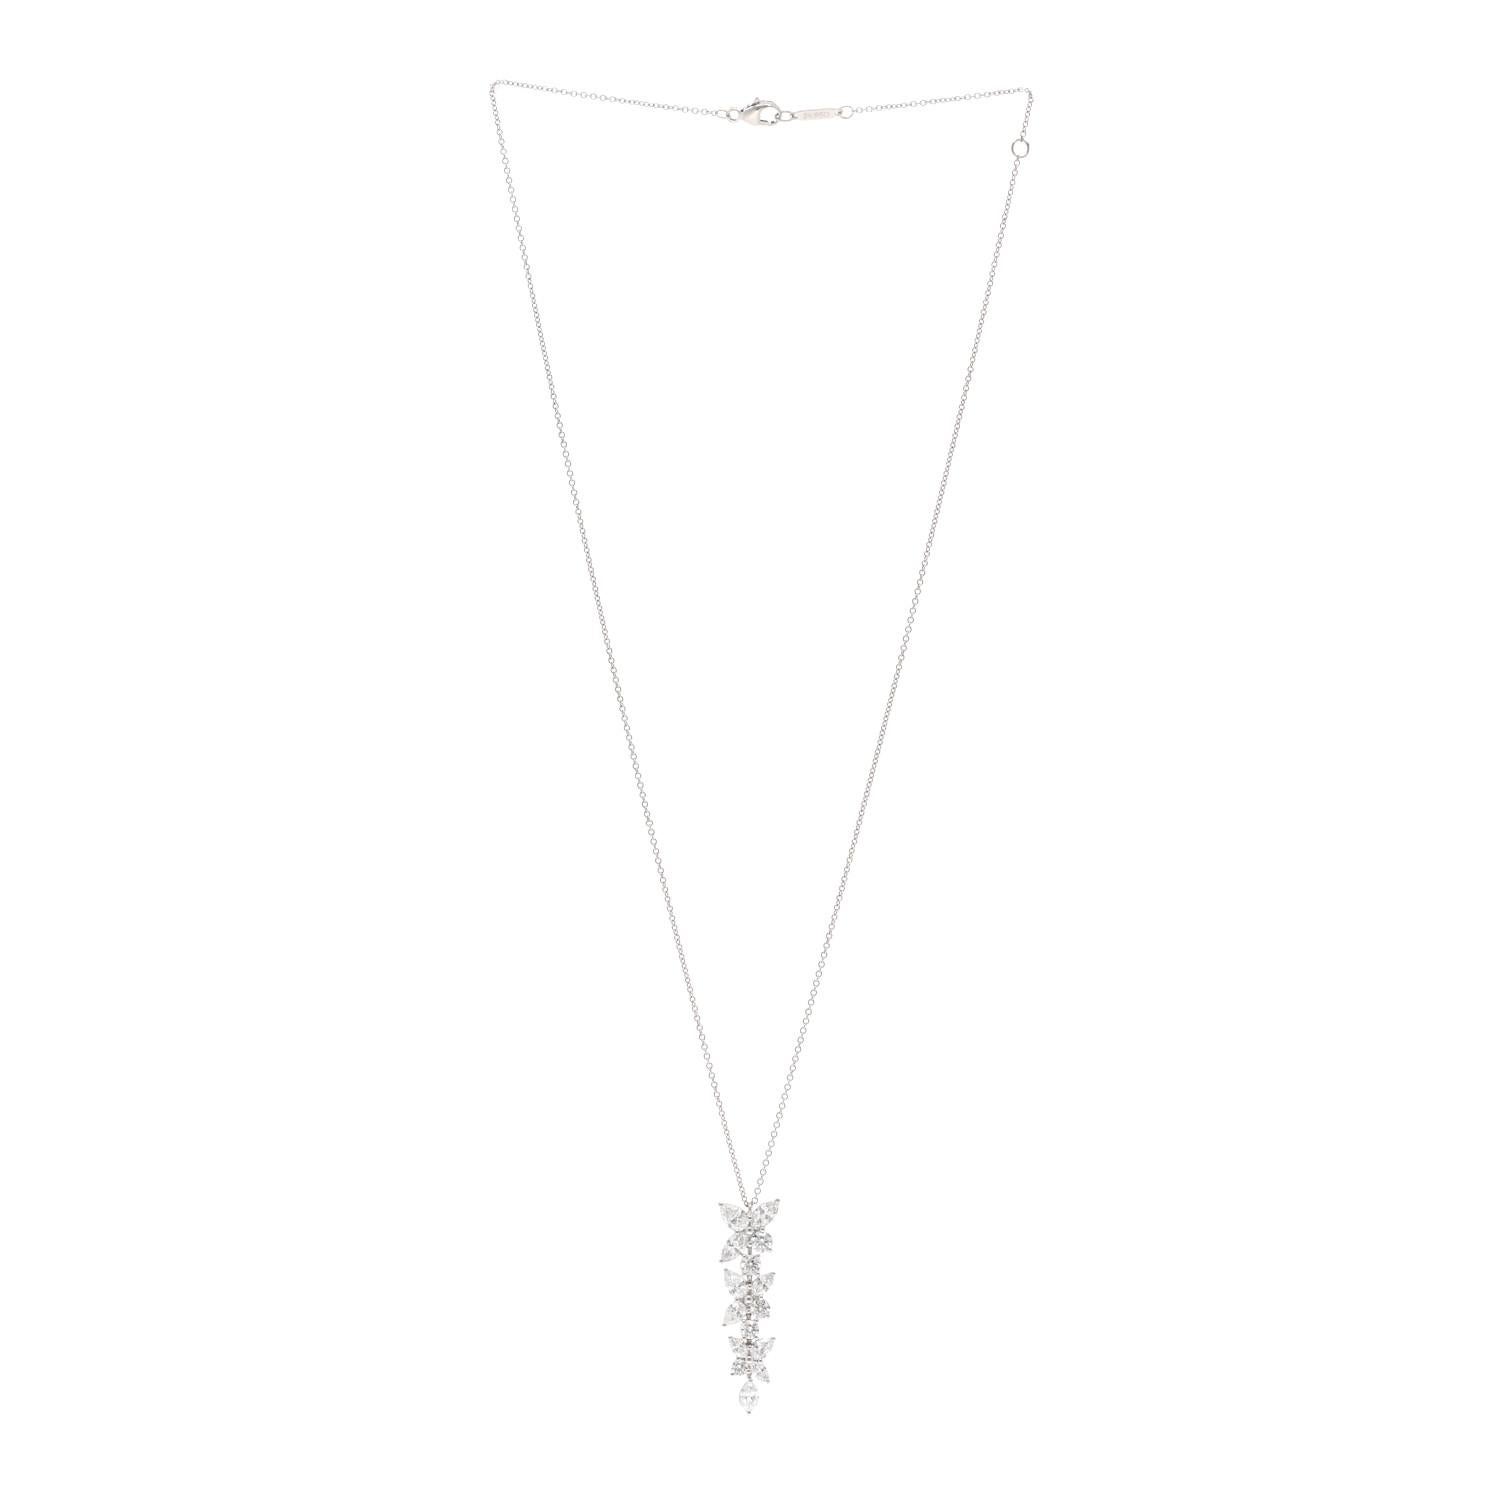 Contemporary Tiffany & Co. Victoria Mixed Cluster drop necklace with diamonds